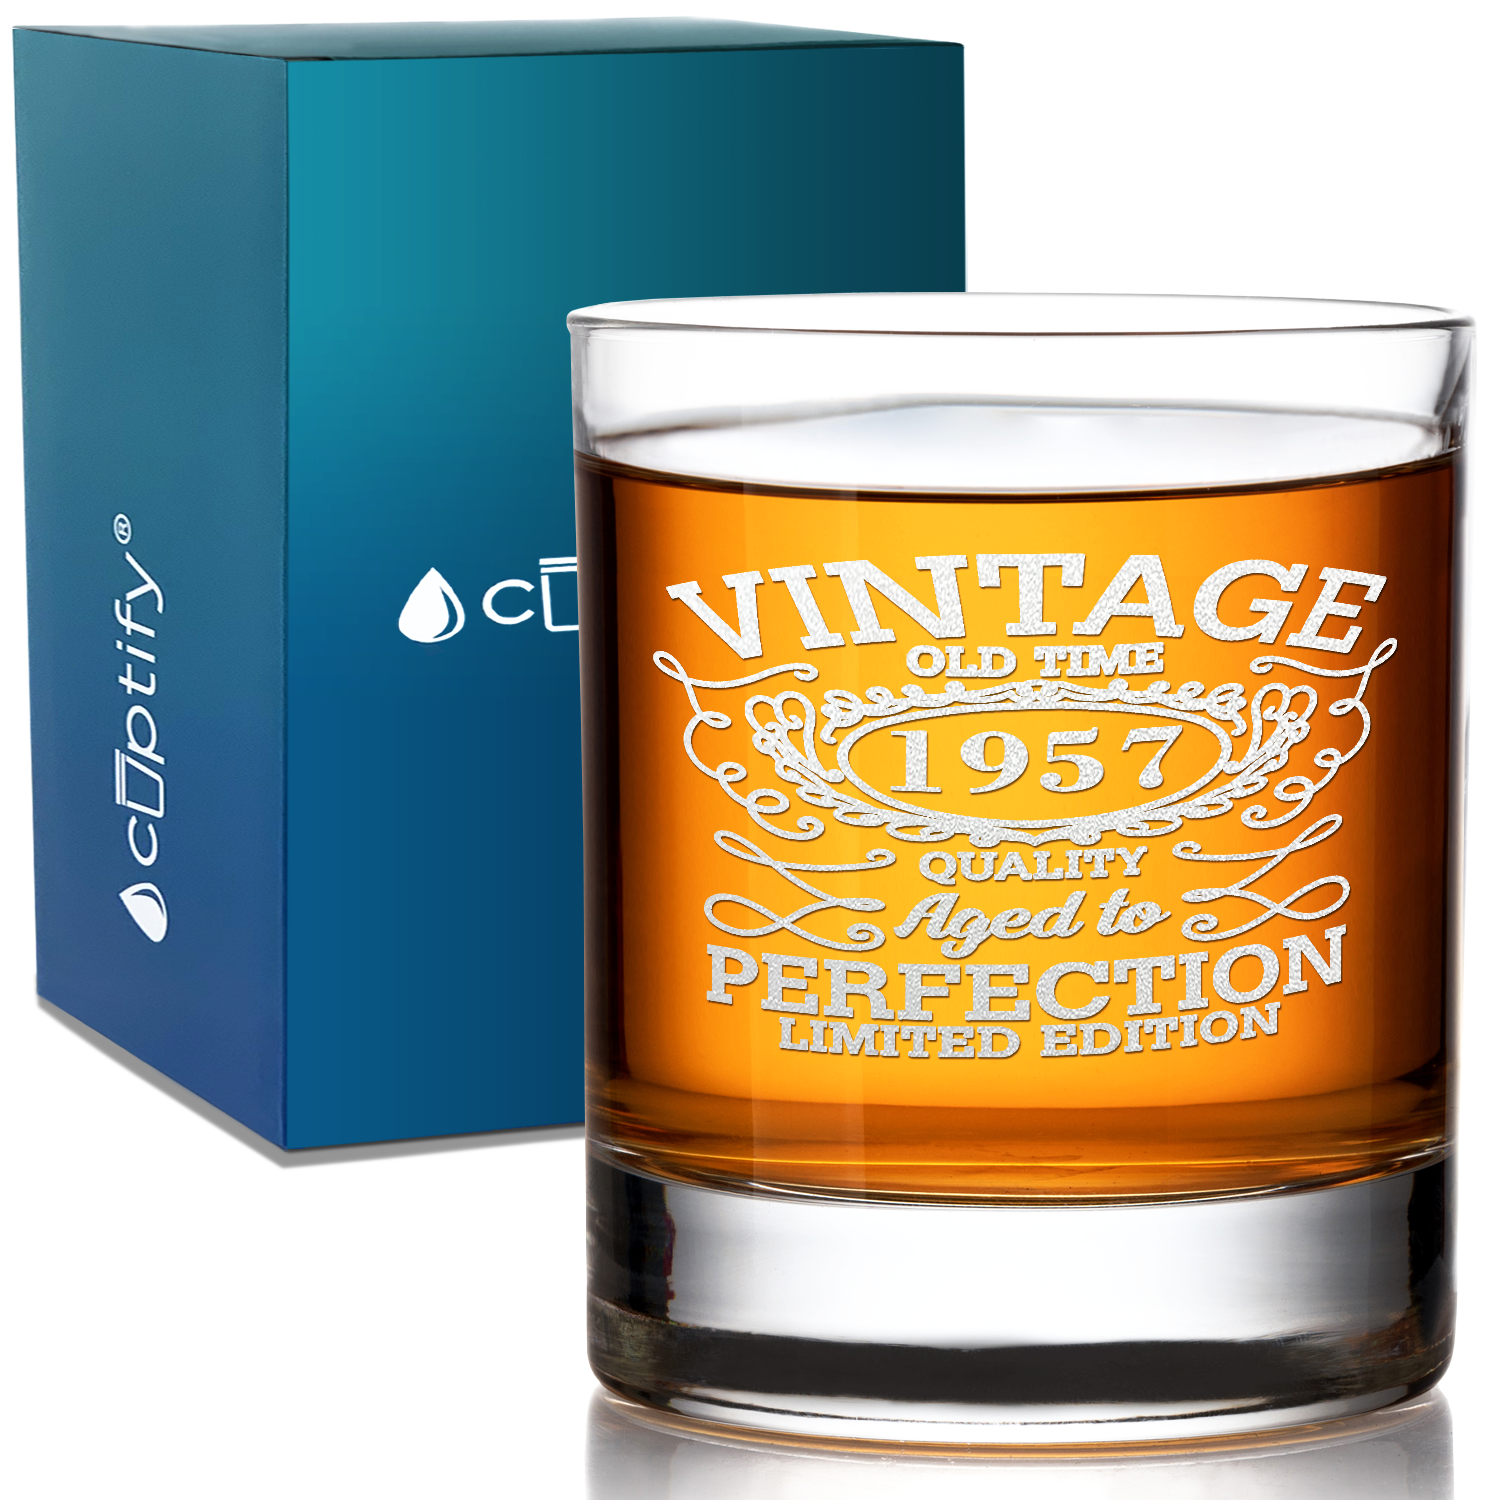 64th Birthday Vintage 64 Years Old Time 1957 Quality Laser Engraved 10.25oz Old Fashion Glass